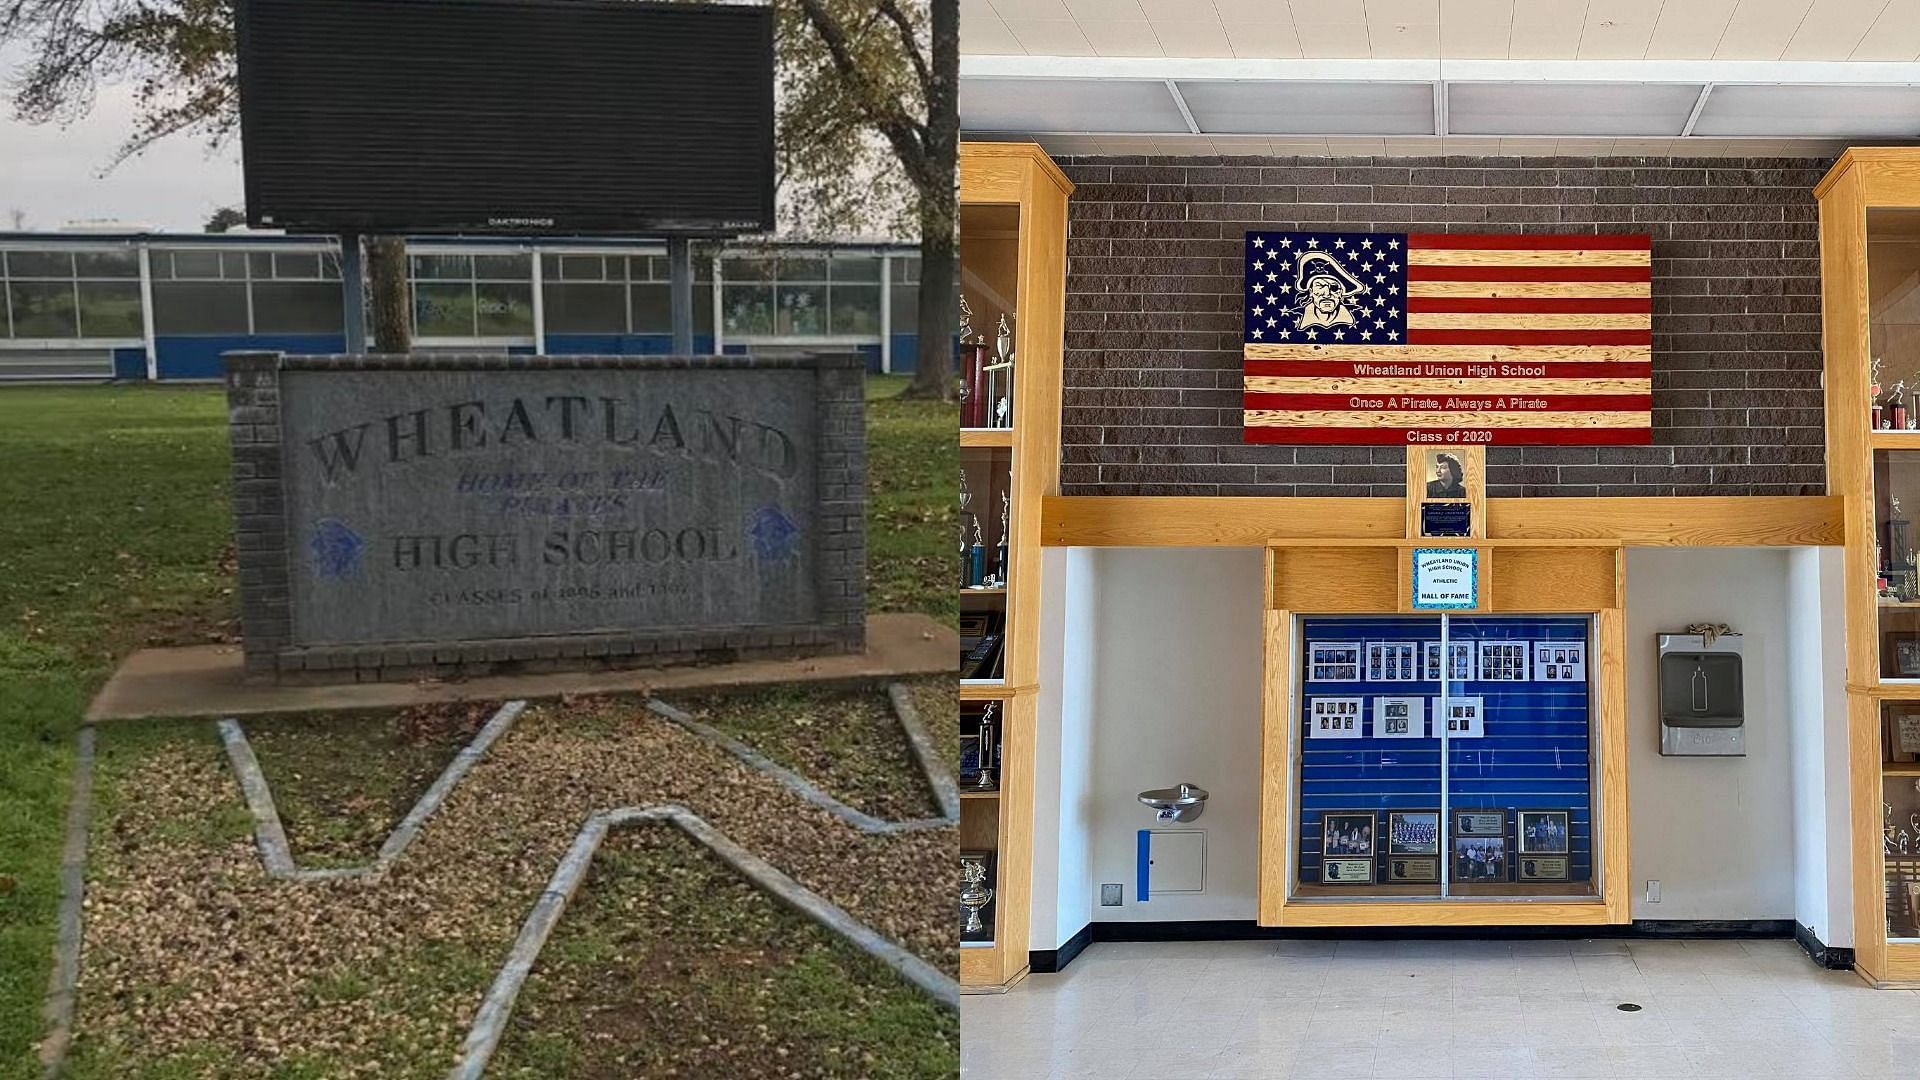 Wheatland High School landed in hot waters after eight students posted Nazi pictures on social media (Image via Wheatland Union High School/Facebook)